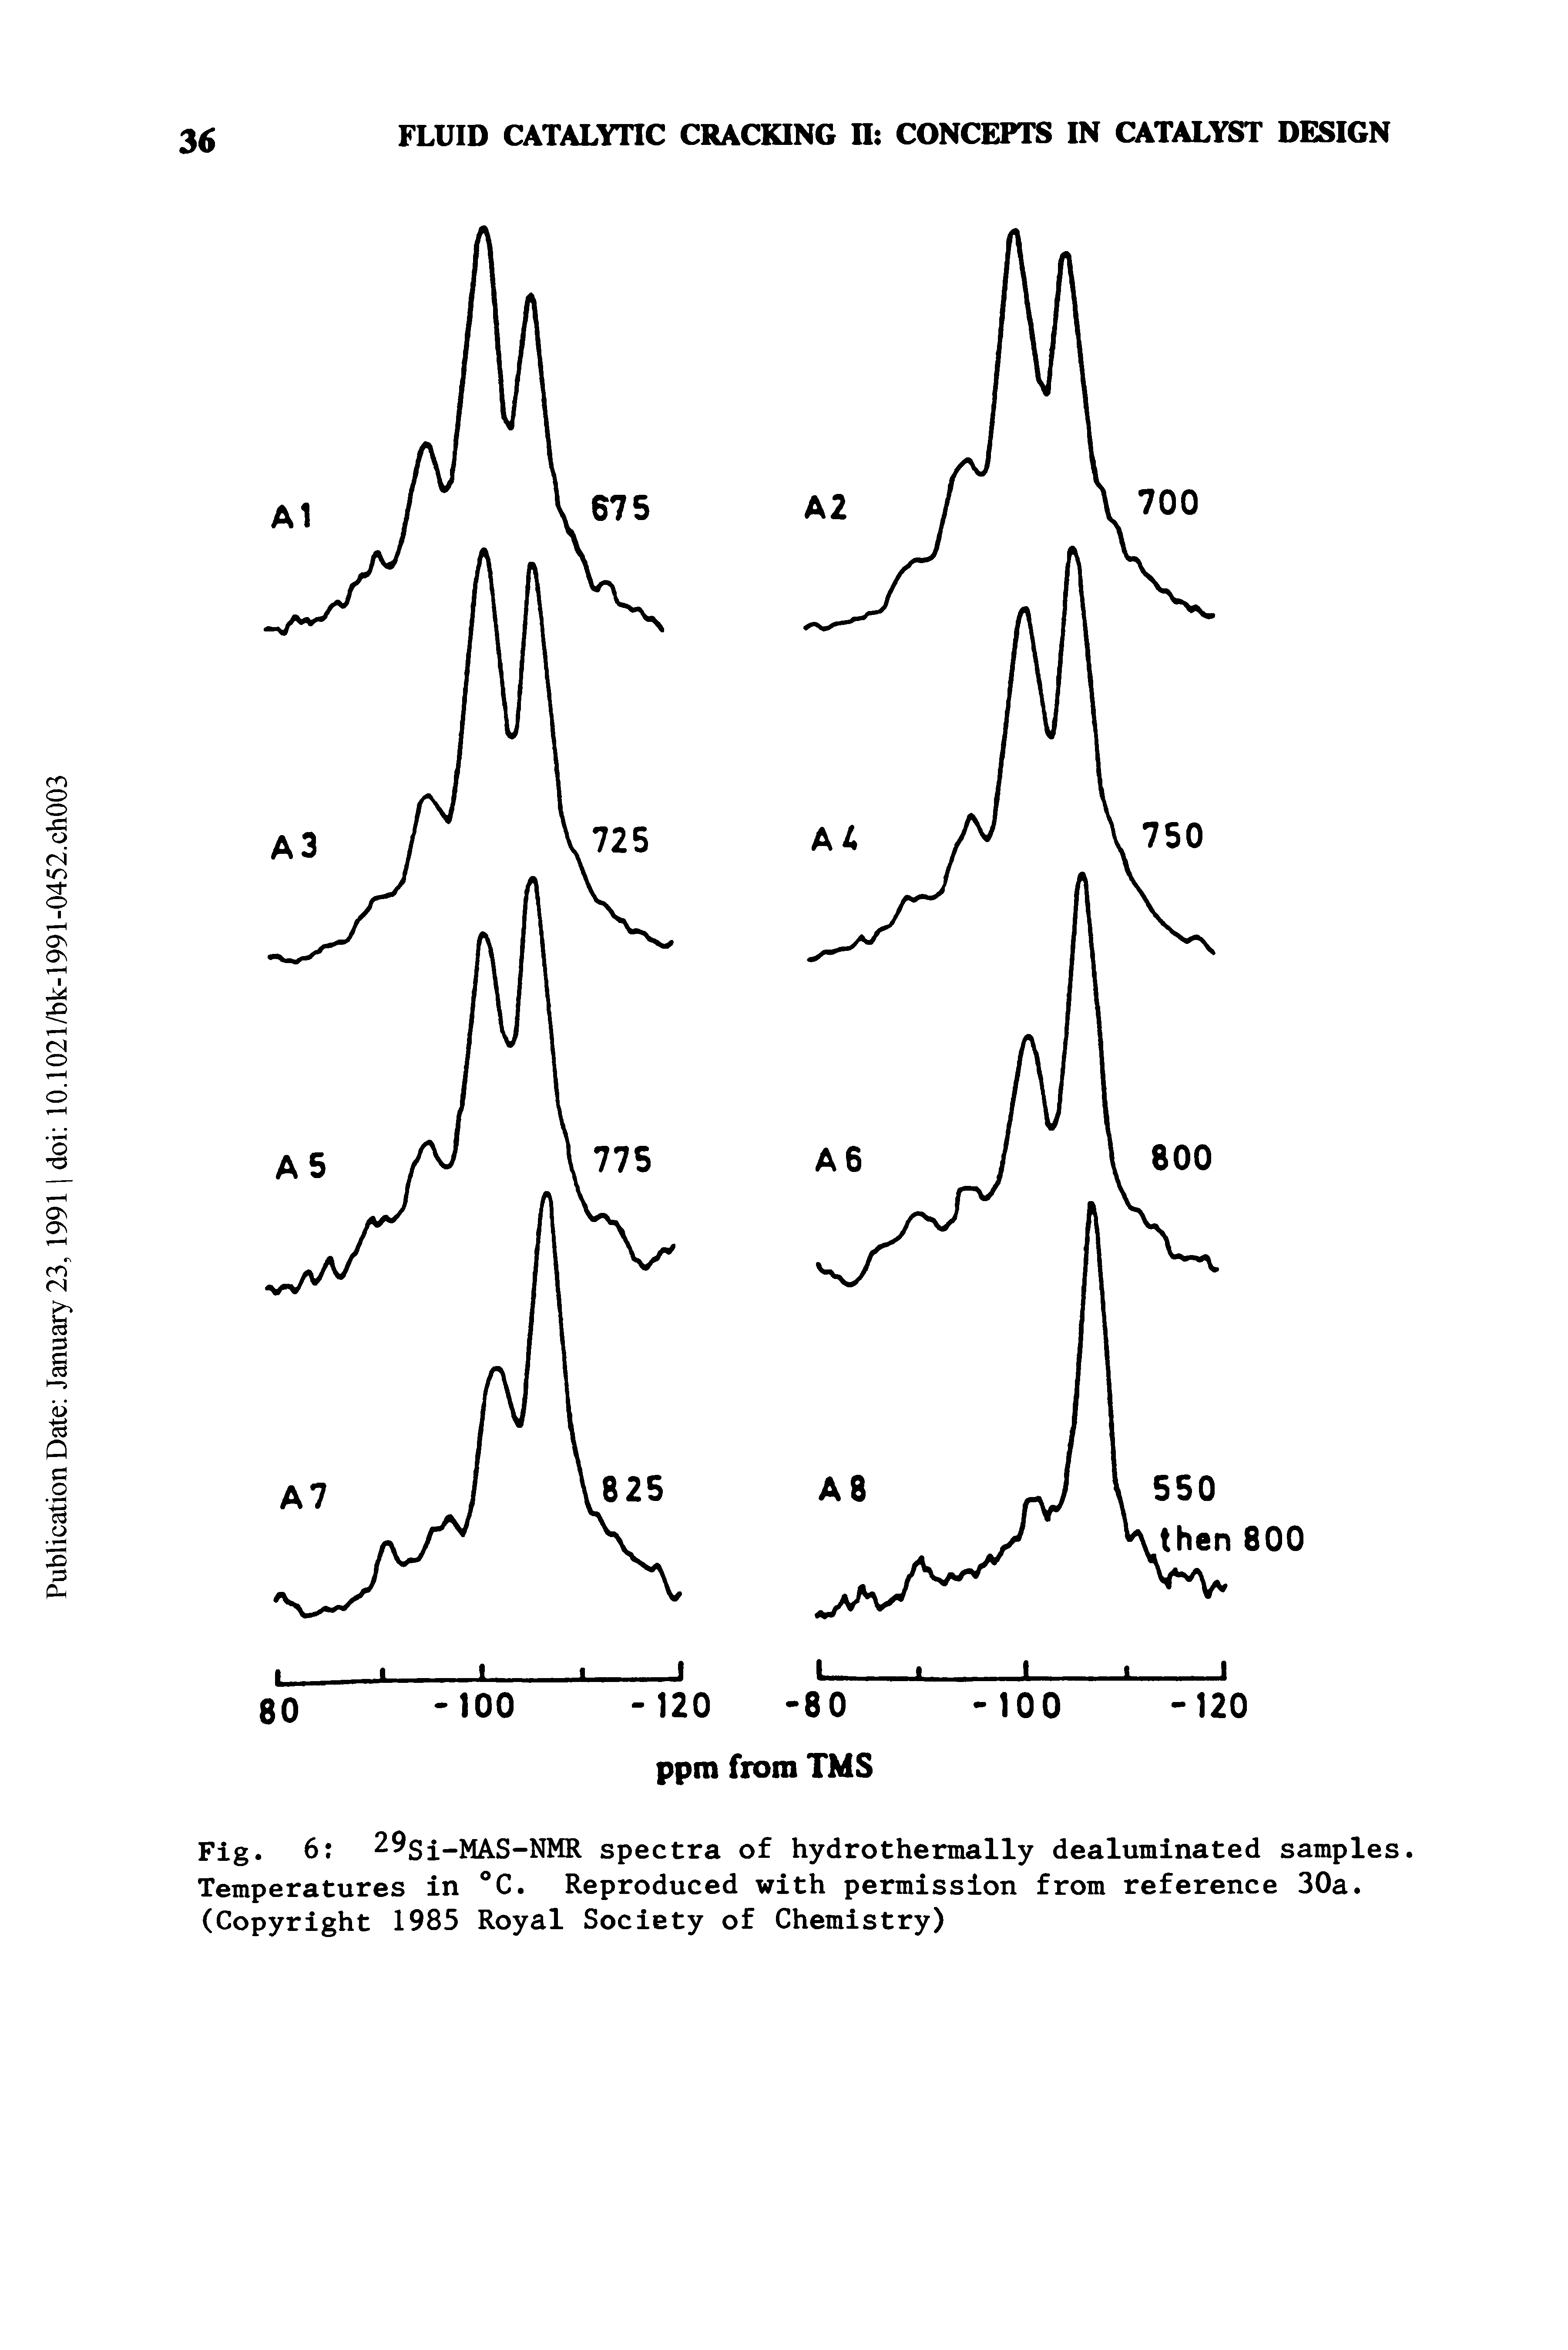 Fig. 6 29gi MAi> NMR spectra of hydrothermally dealuminated samples. Temperatures in °C. Reproduced with permission from reference 30a. (Copyright 1985 Royal Society of Chemistry)...